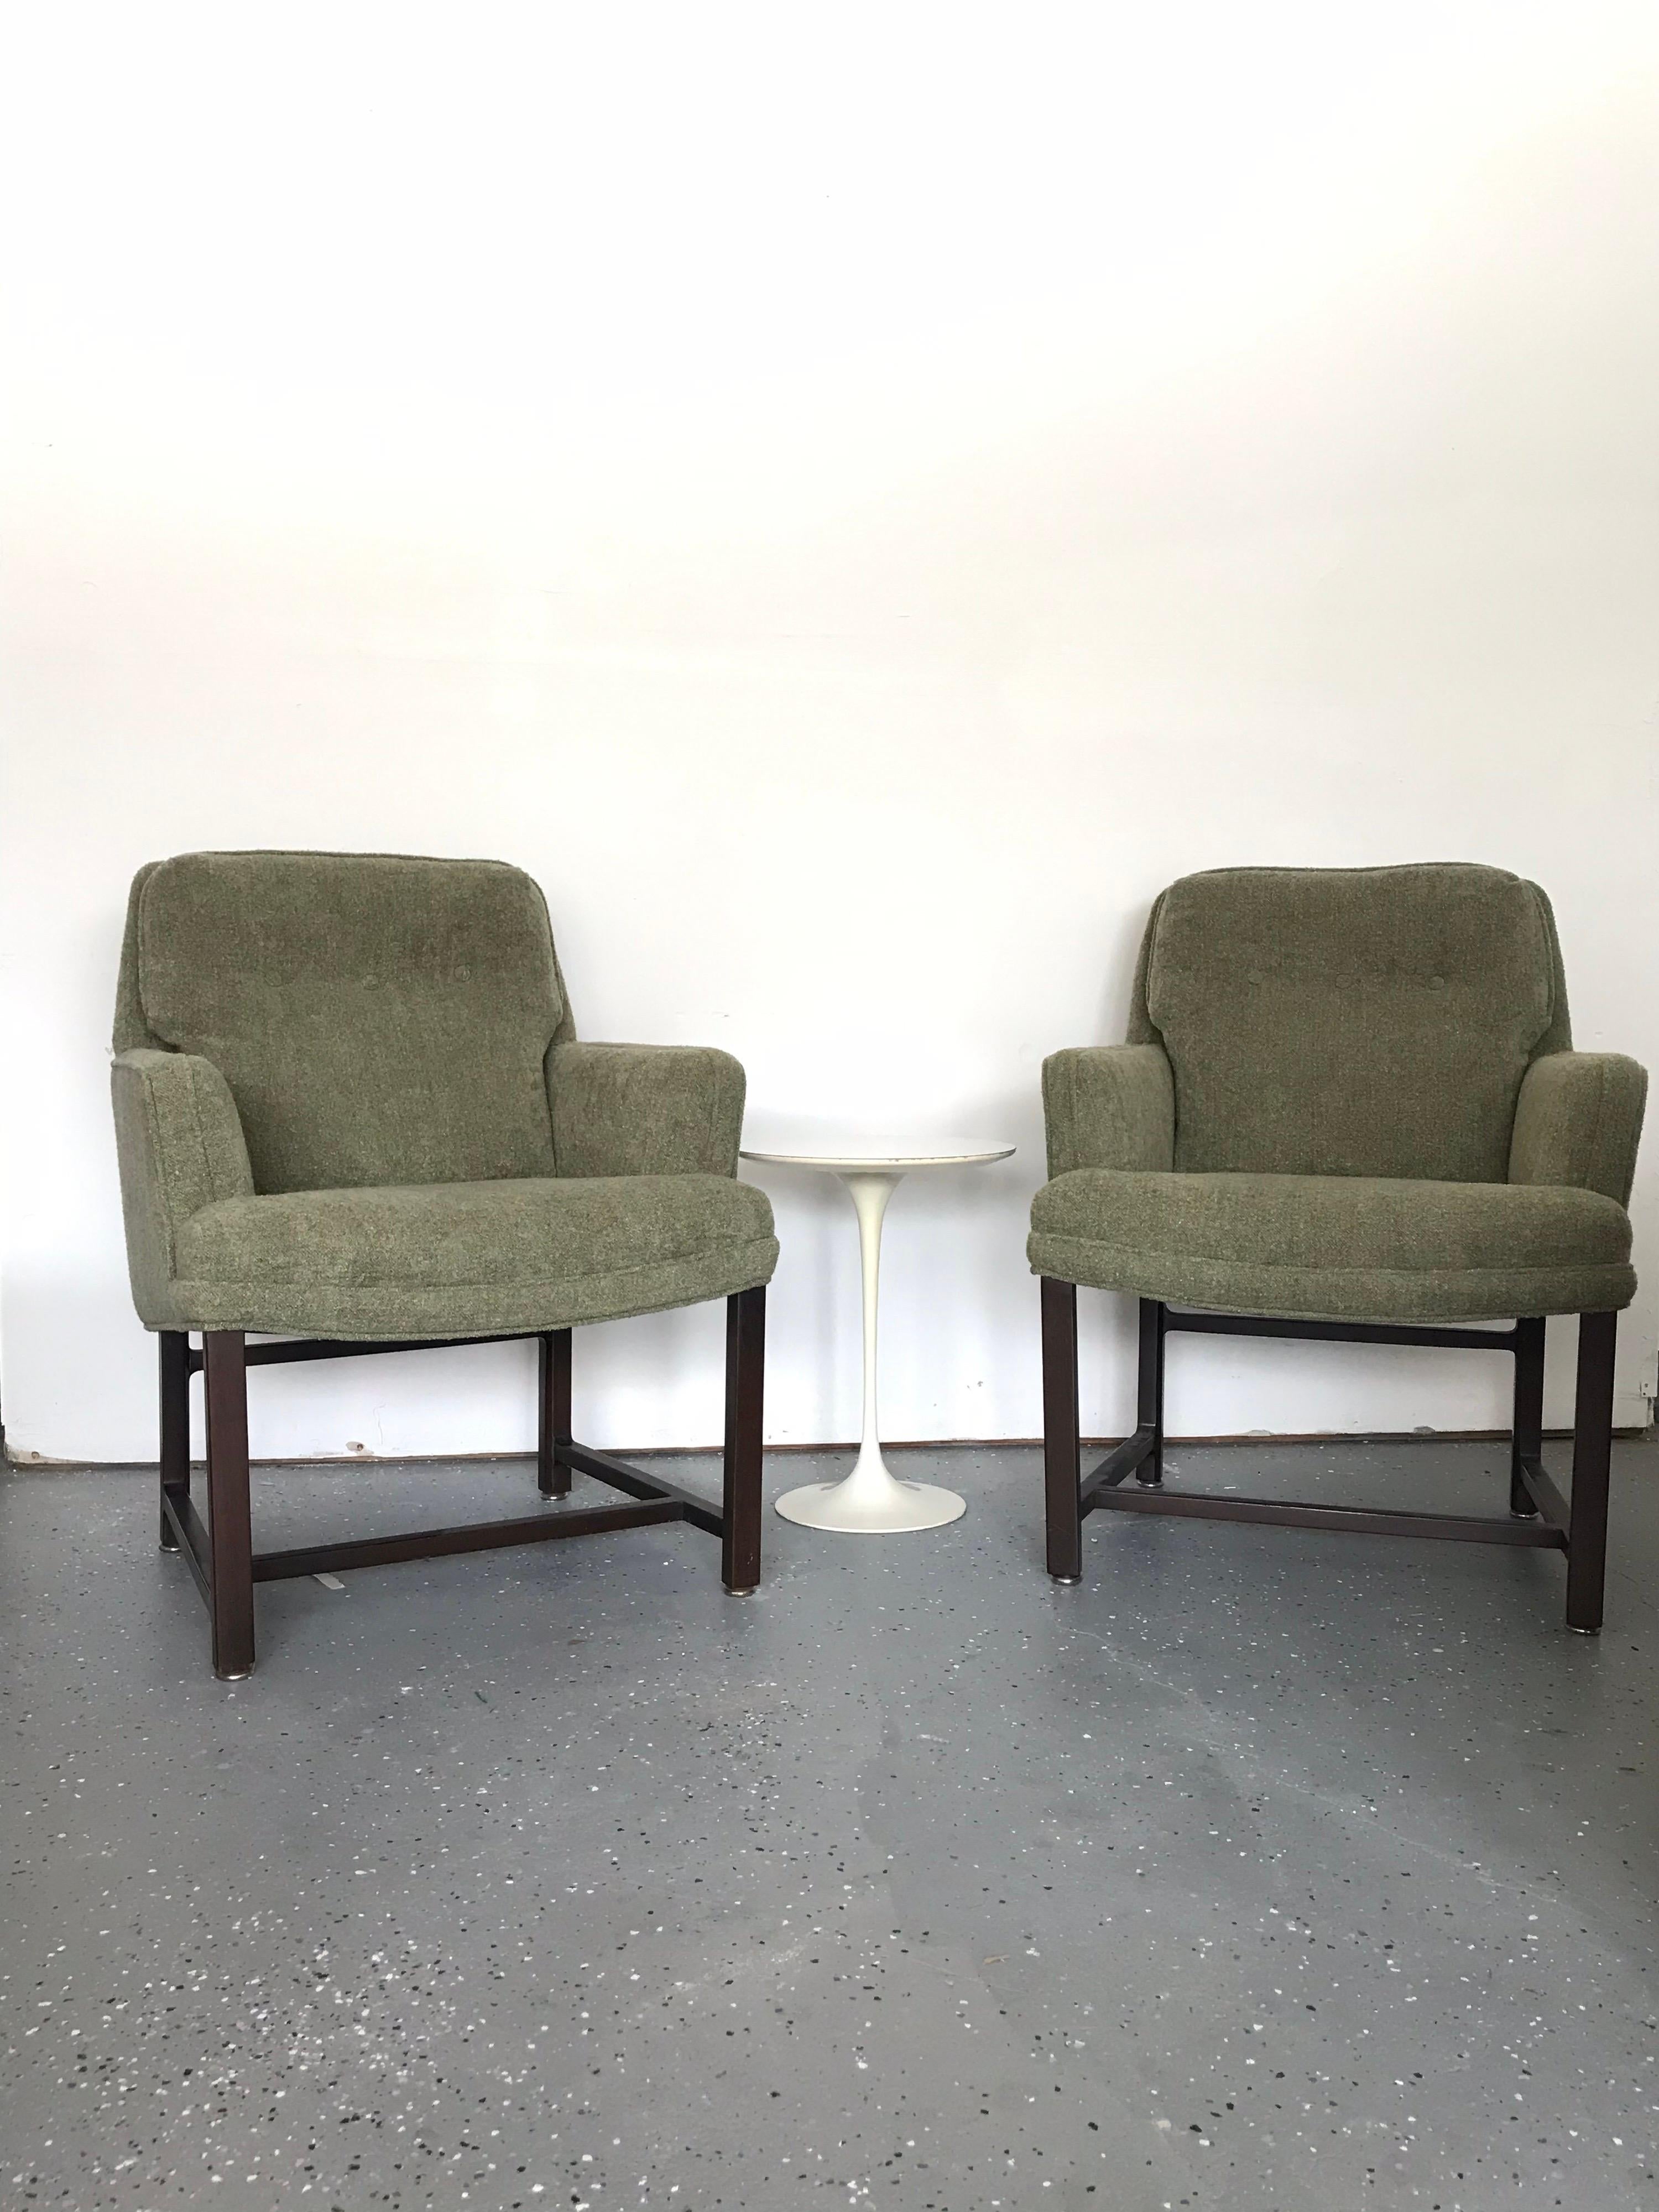 Multiple applications for this unusual pair of armchairs/ loungers by Edward Wormley for Dunbar Furniture. Chairs feature a nubby sage green upholstery over a dark mahogany frame. Chairs are deceivingly large in scale. Please reference the picture